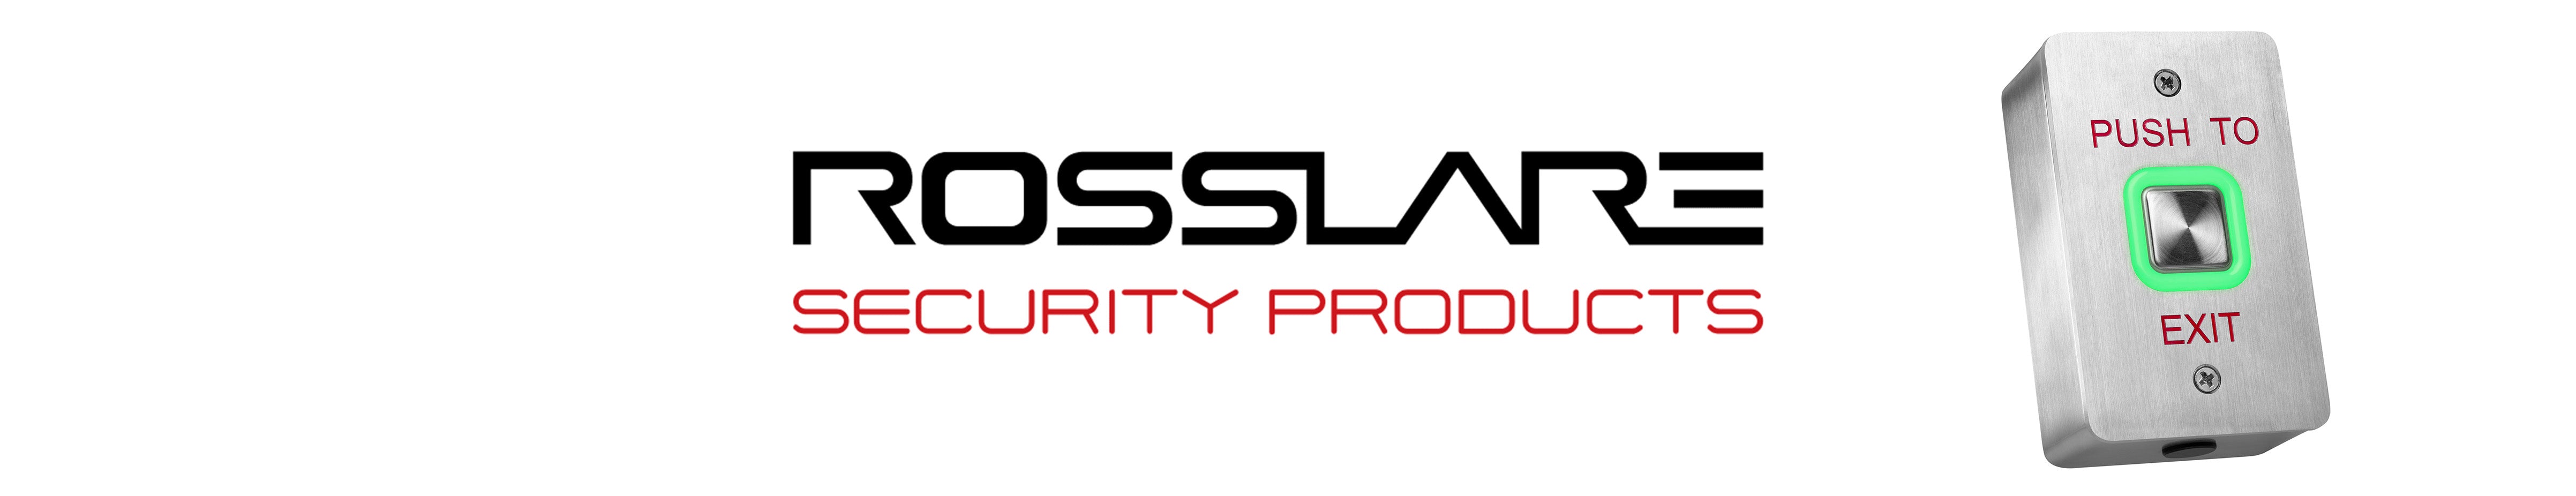 RossIare: Access Control and Power Supplies Now Available on CCTVImporters.com.au